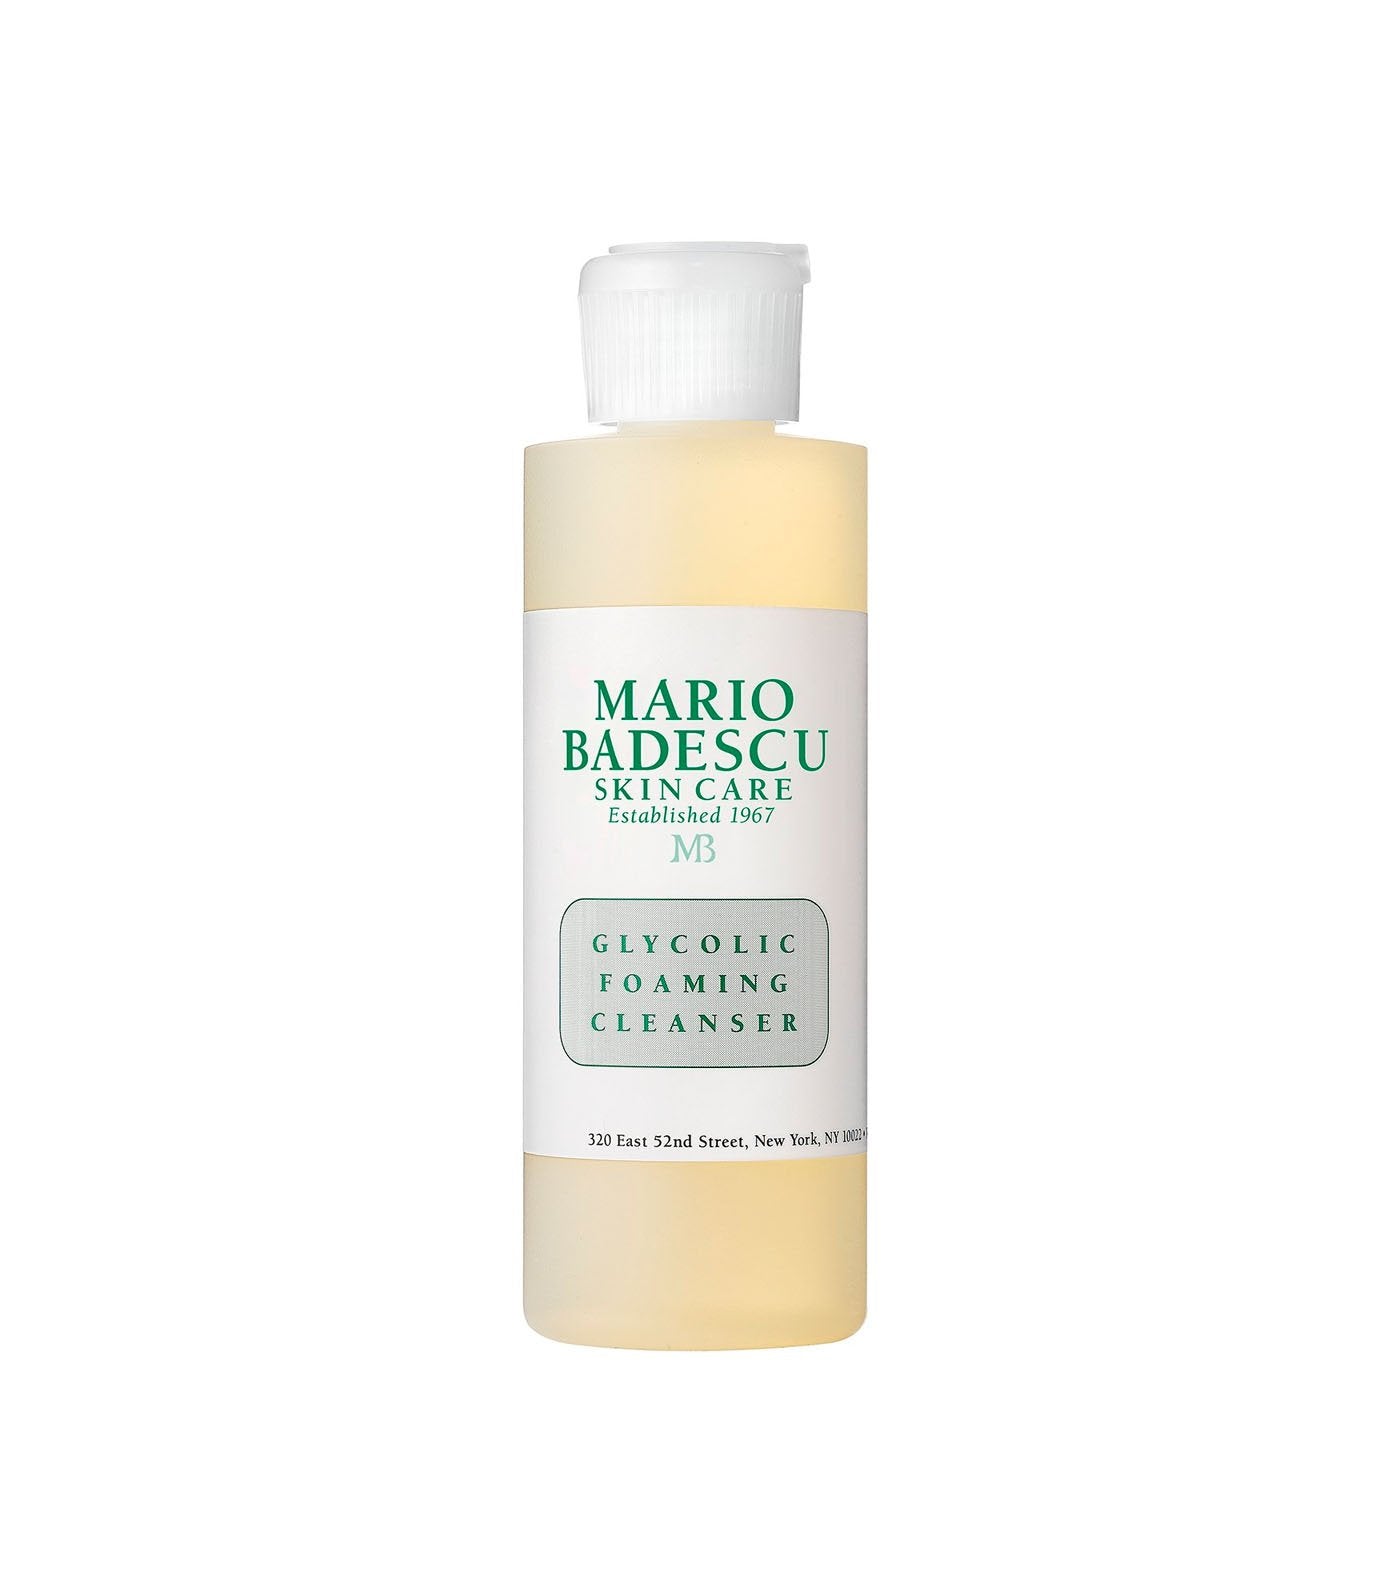 Mario Badescu Free Glycolic Foaming Cleanser